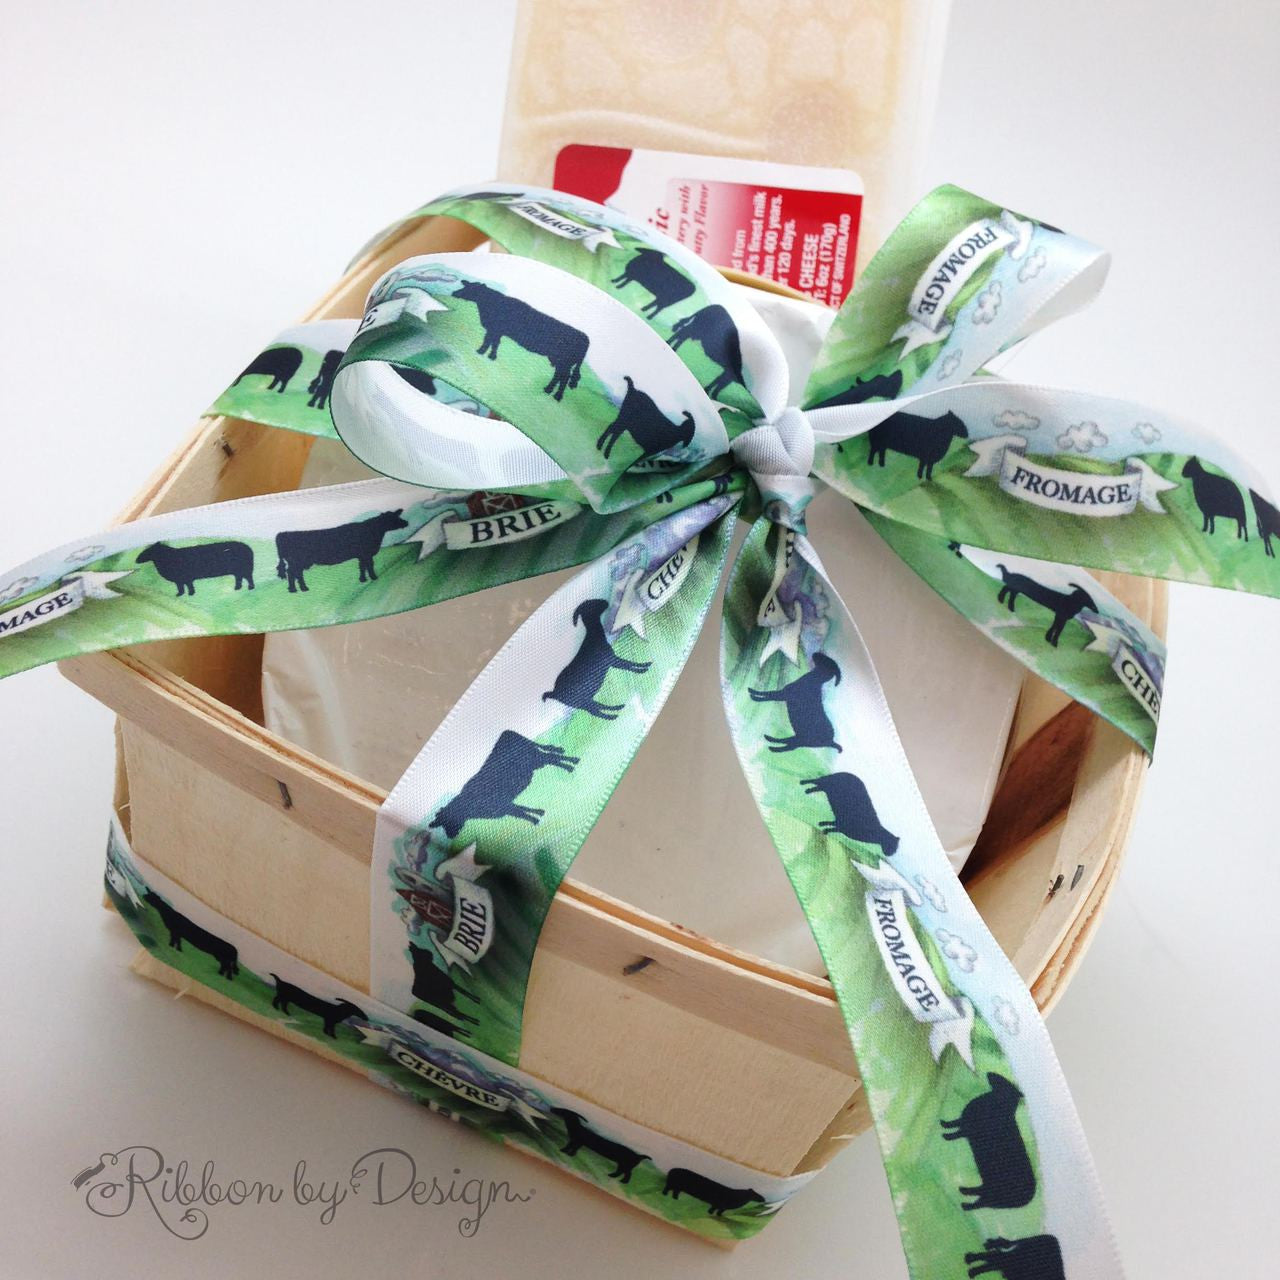 This beautiful cheese basket tied with our cheese themed ribbon is a great gift for the cheese lover in your life!